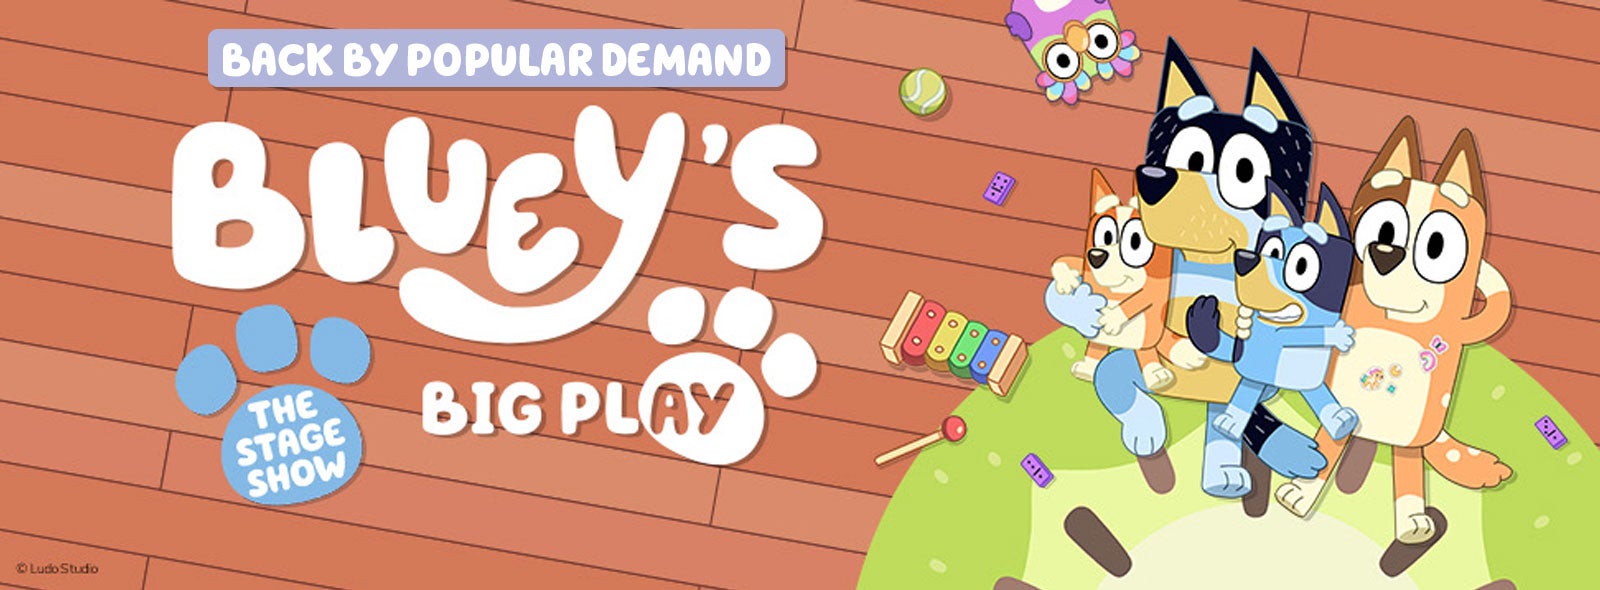 Bluey's Big Play - Bluey Official Website